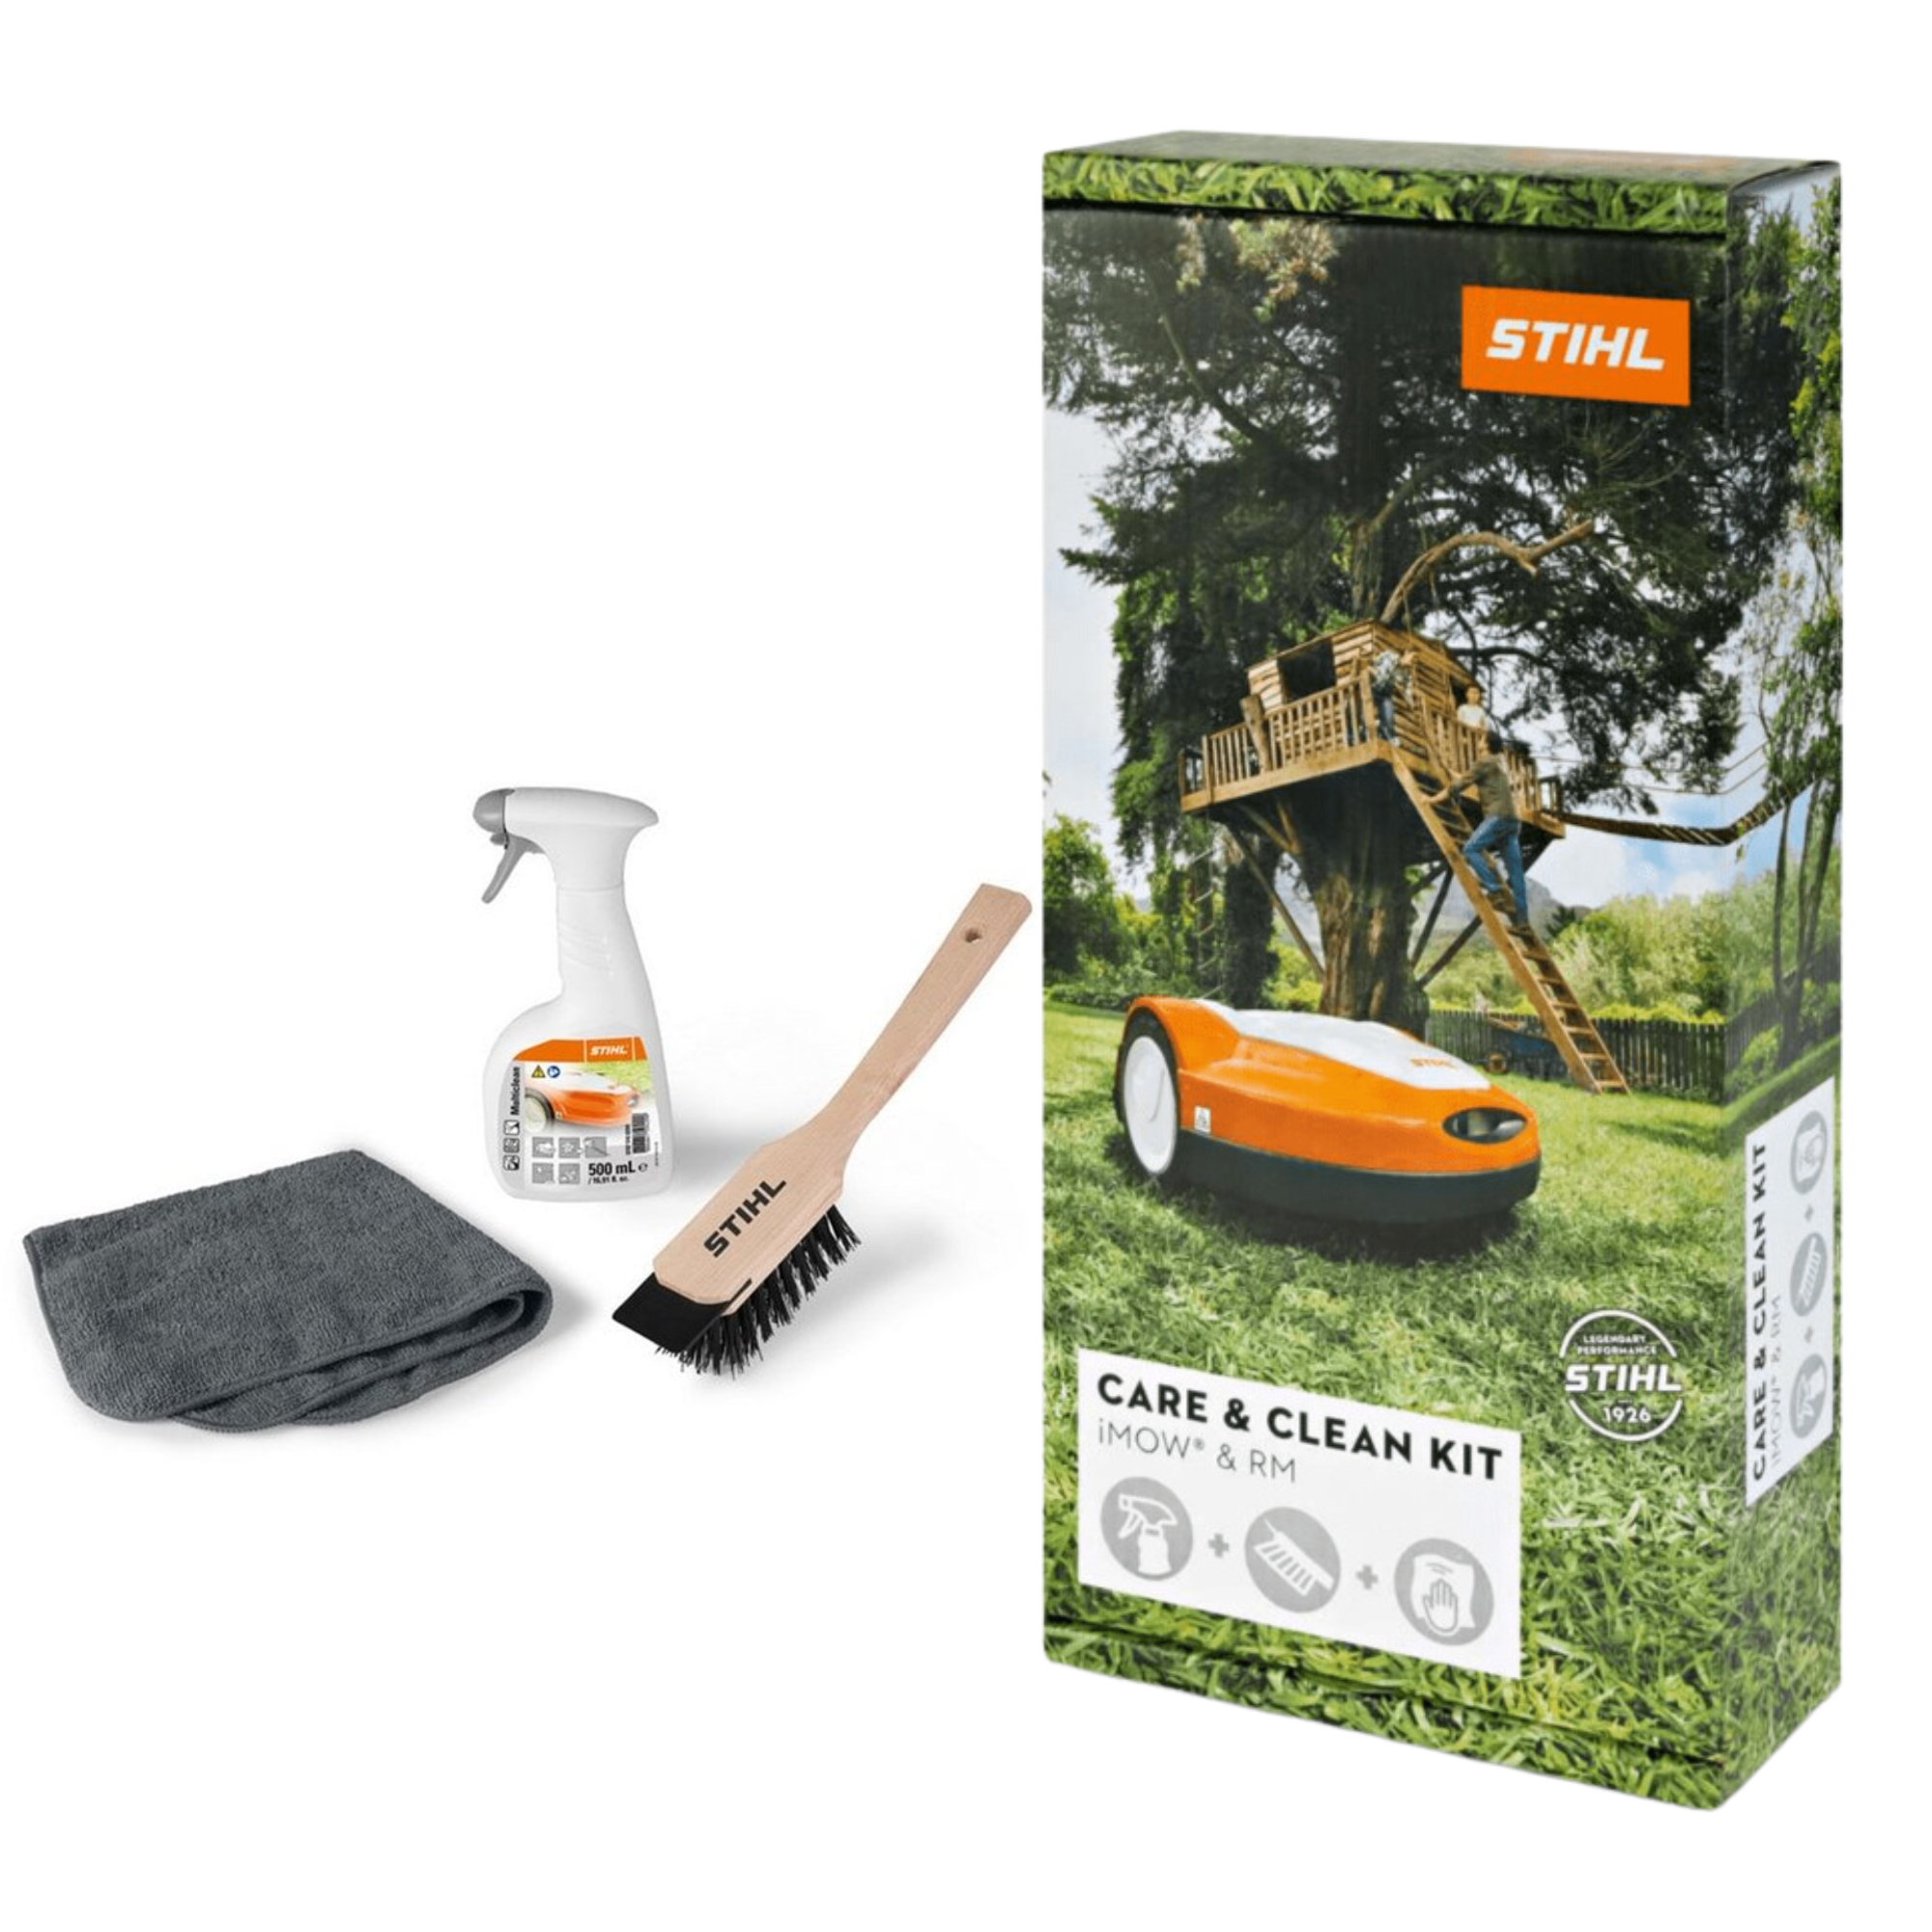 Stihl Care & Clean Kit for RM & iMOW | 0782 516 8600